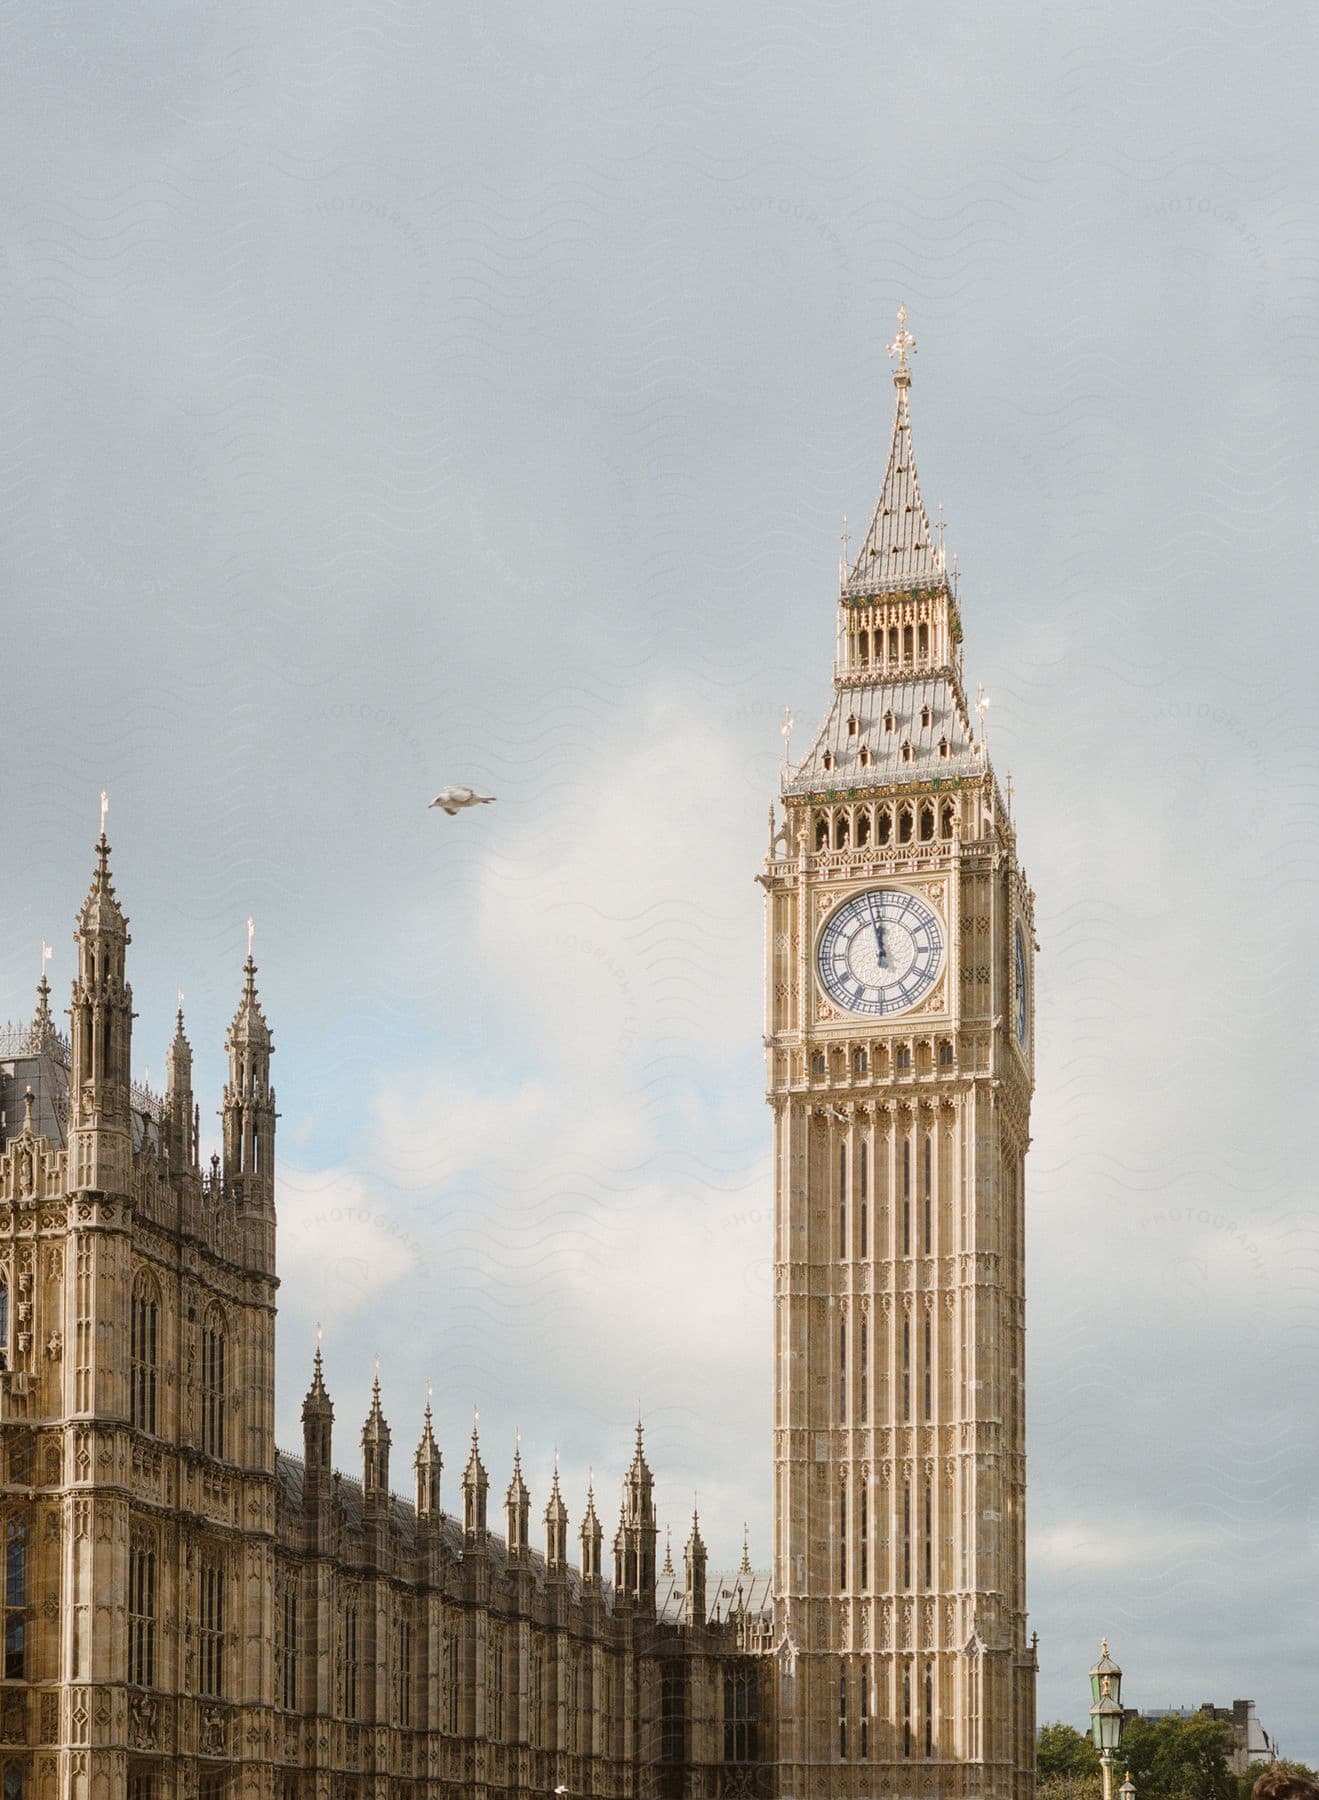 The palace of westminster with big ben an architectural landmark in london